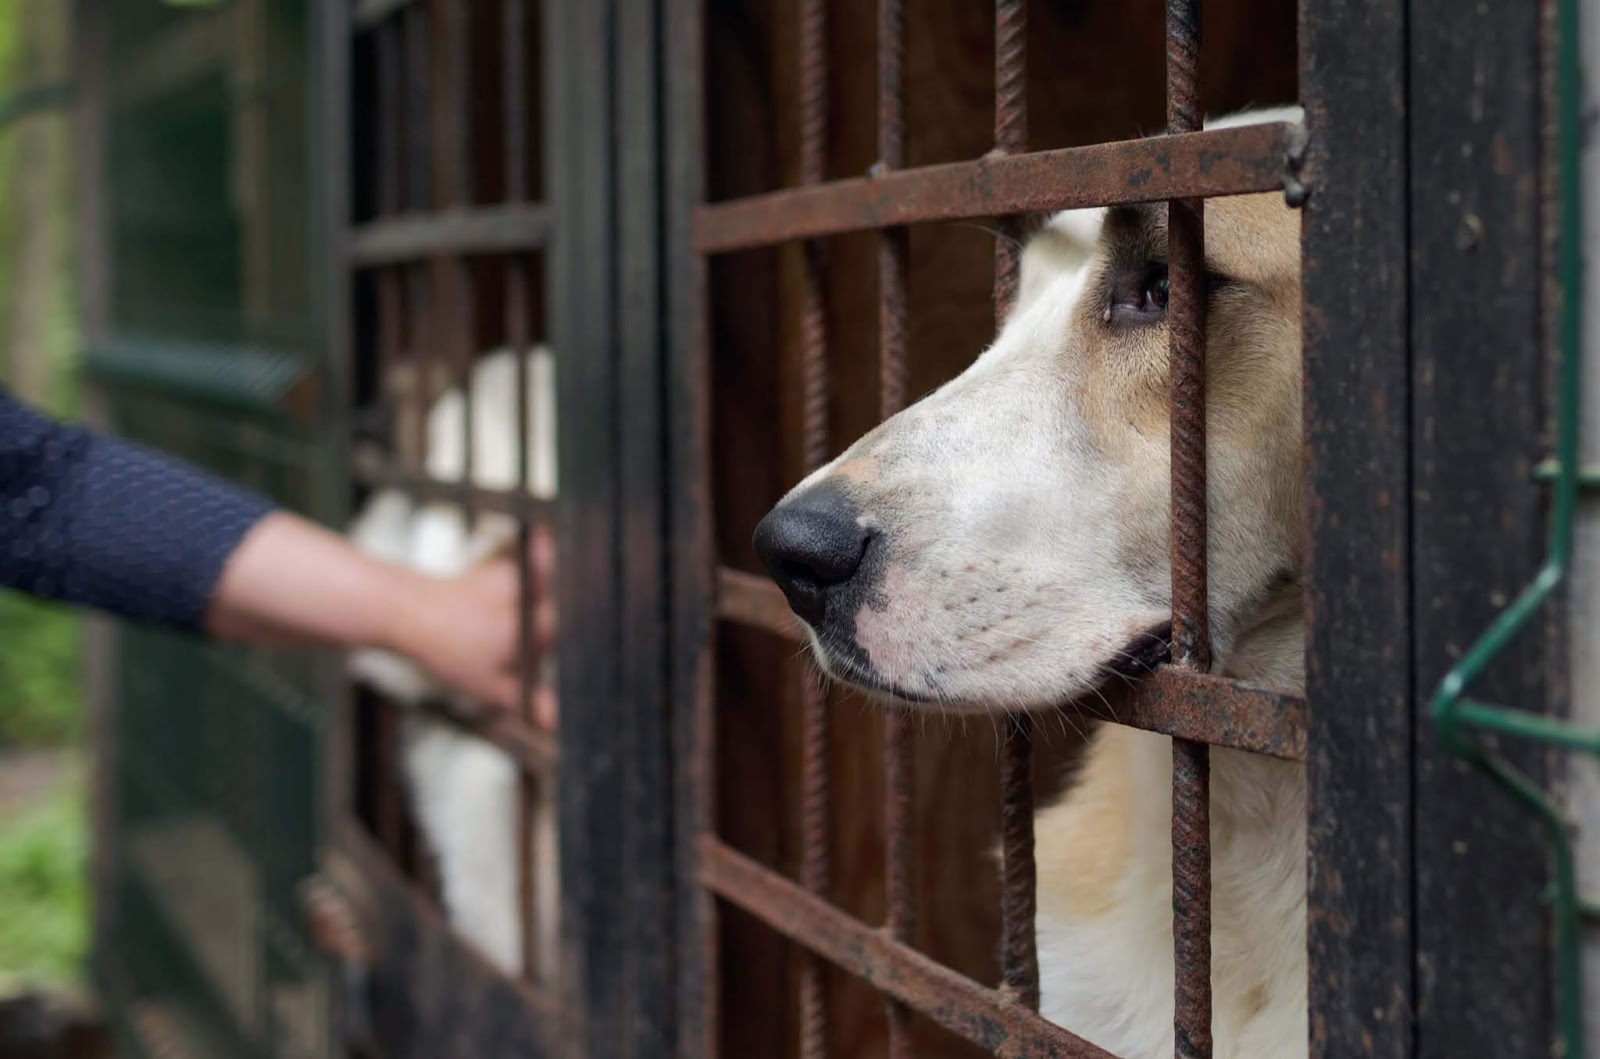 South Korean Court Finally Rules That Killing Dogs For Meat Is Illegal